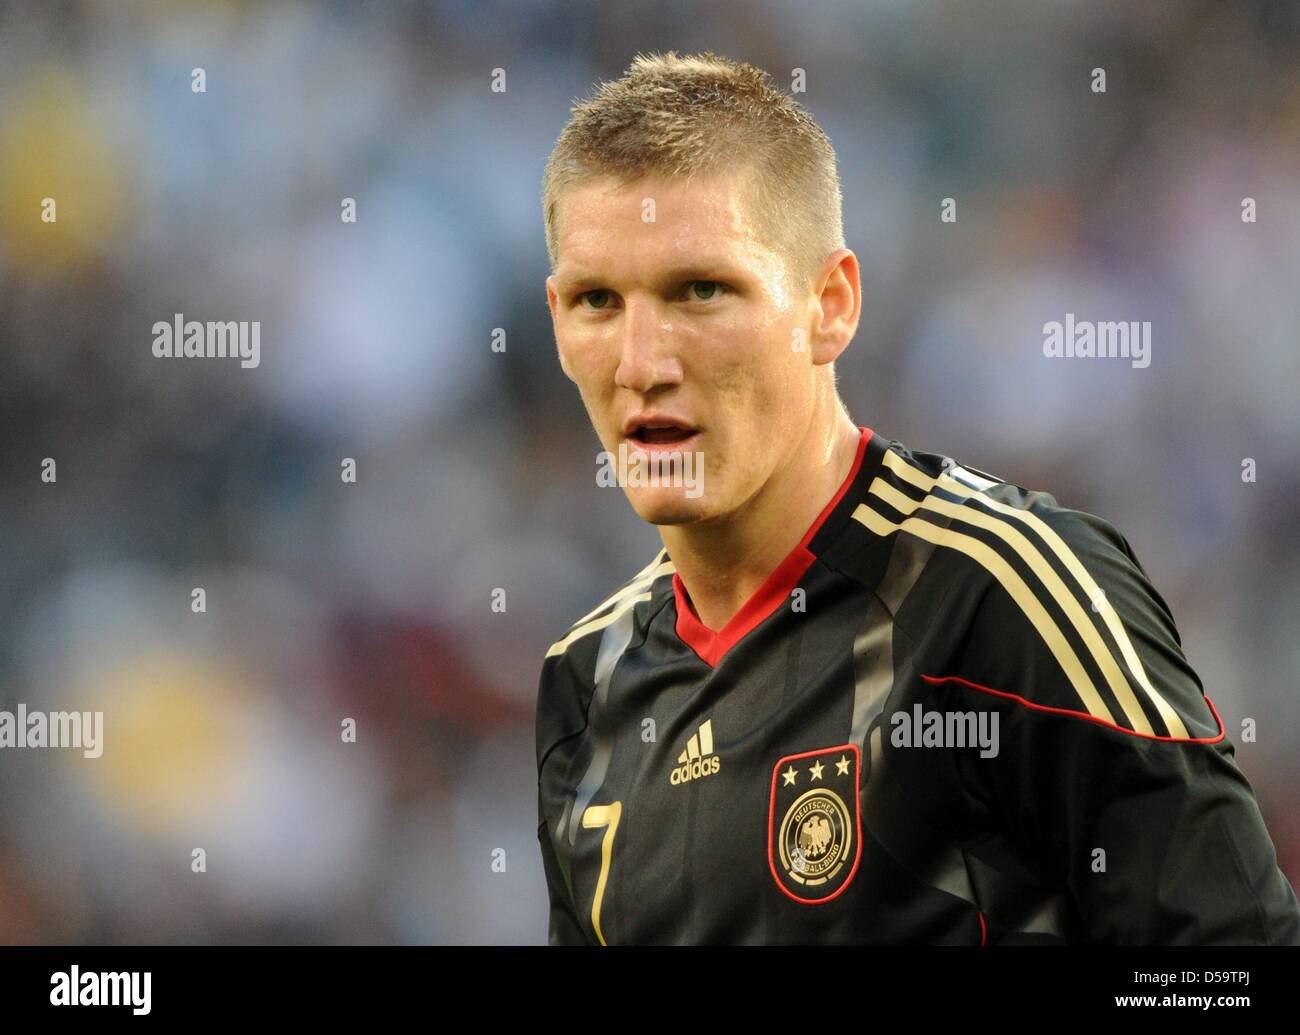 Germany's Bastian Schweinsteiger during the 2010 FIFA World Cup quarterfinal match between Argentina and Germany at the Green Point Stadium in Cape Town, South Africa 03 July 2010. Germany won 4-0. Photo: Marcus Brandt dpa - Please refer to http://dpaq.de/FIFA-WM2010-TC Stock Photo